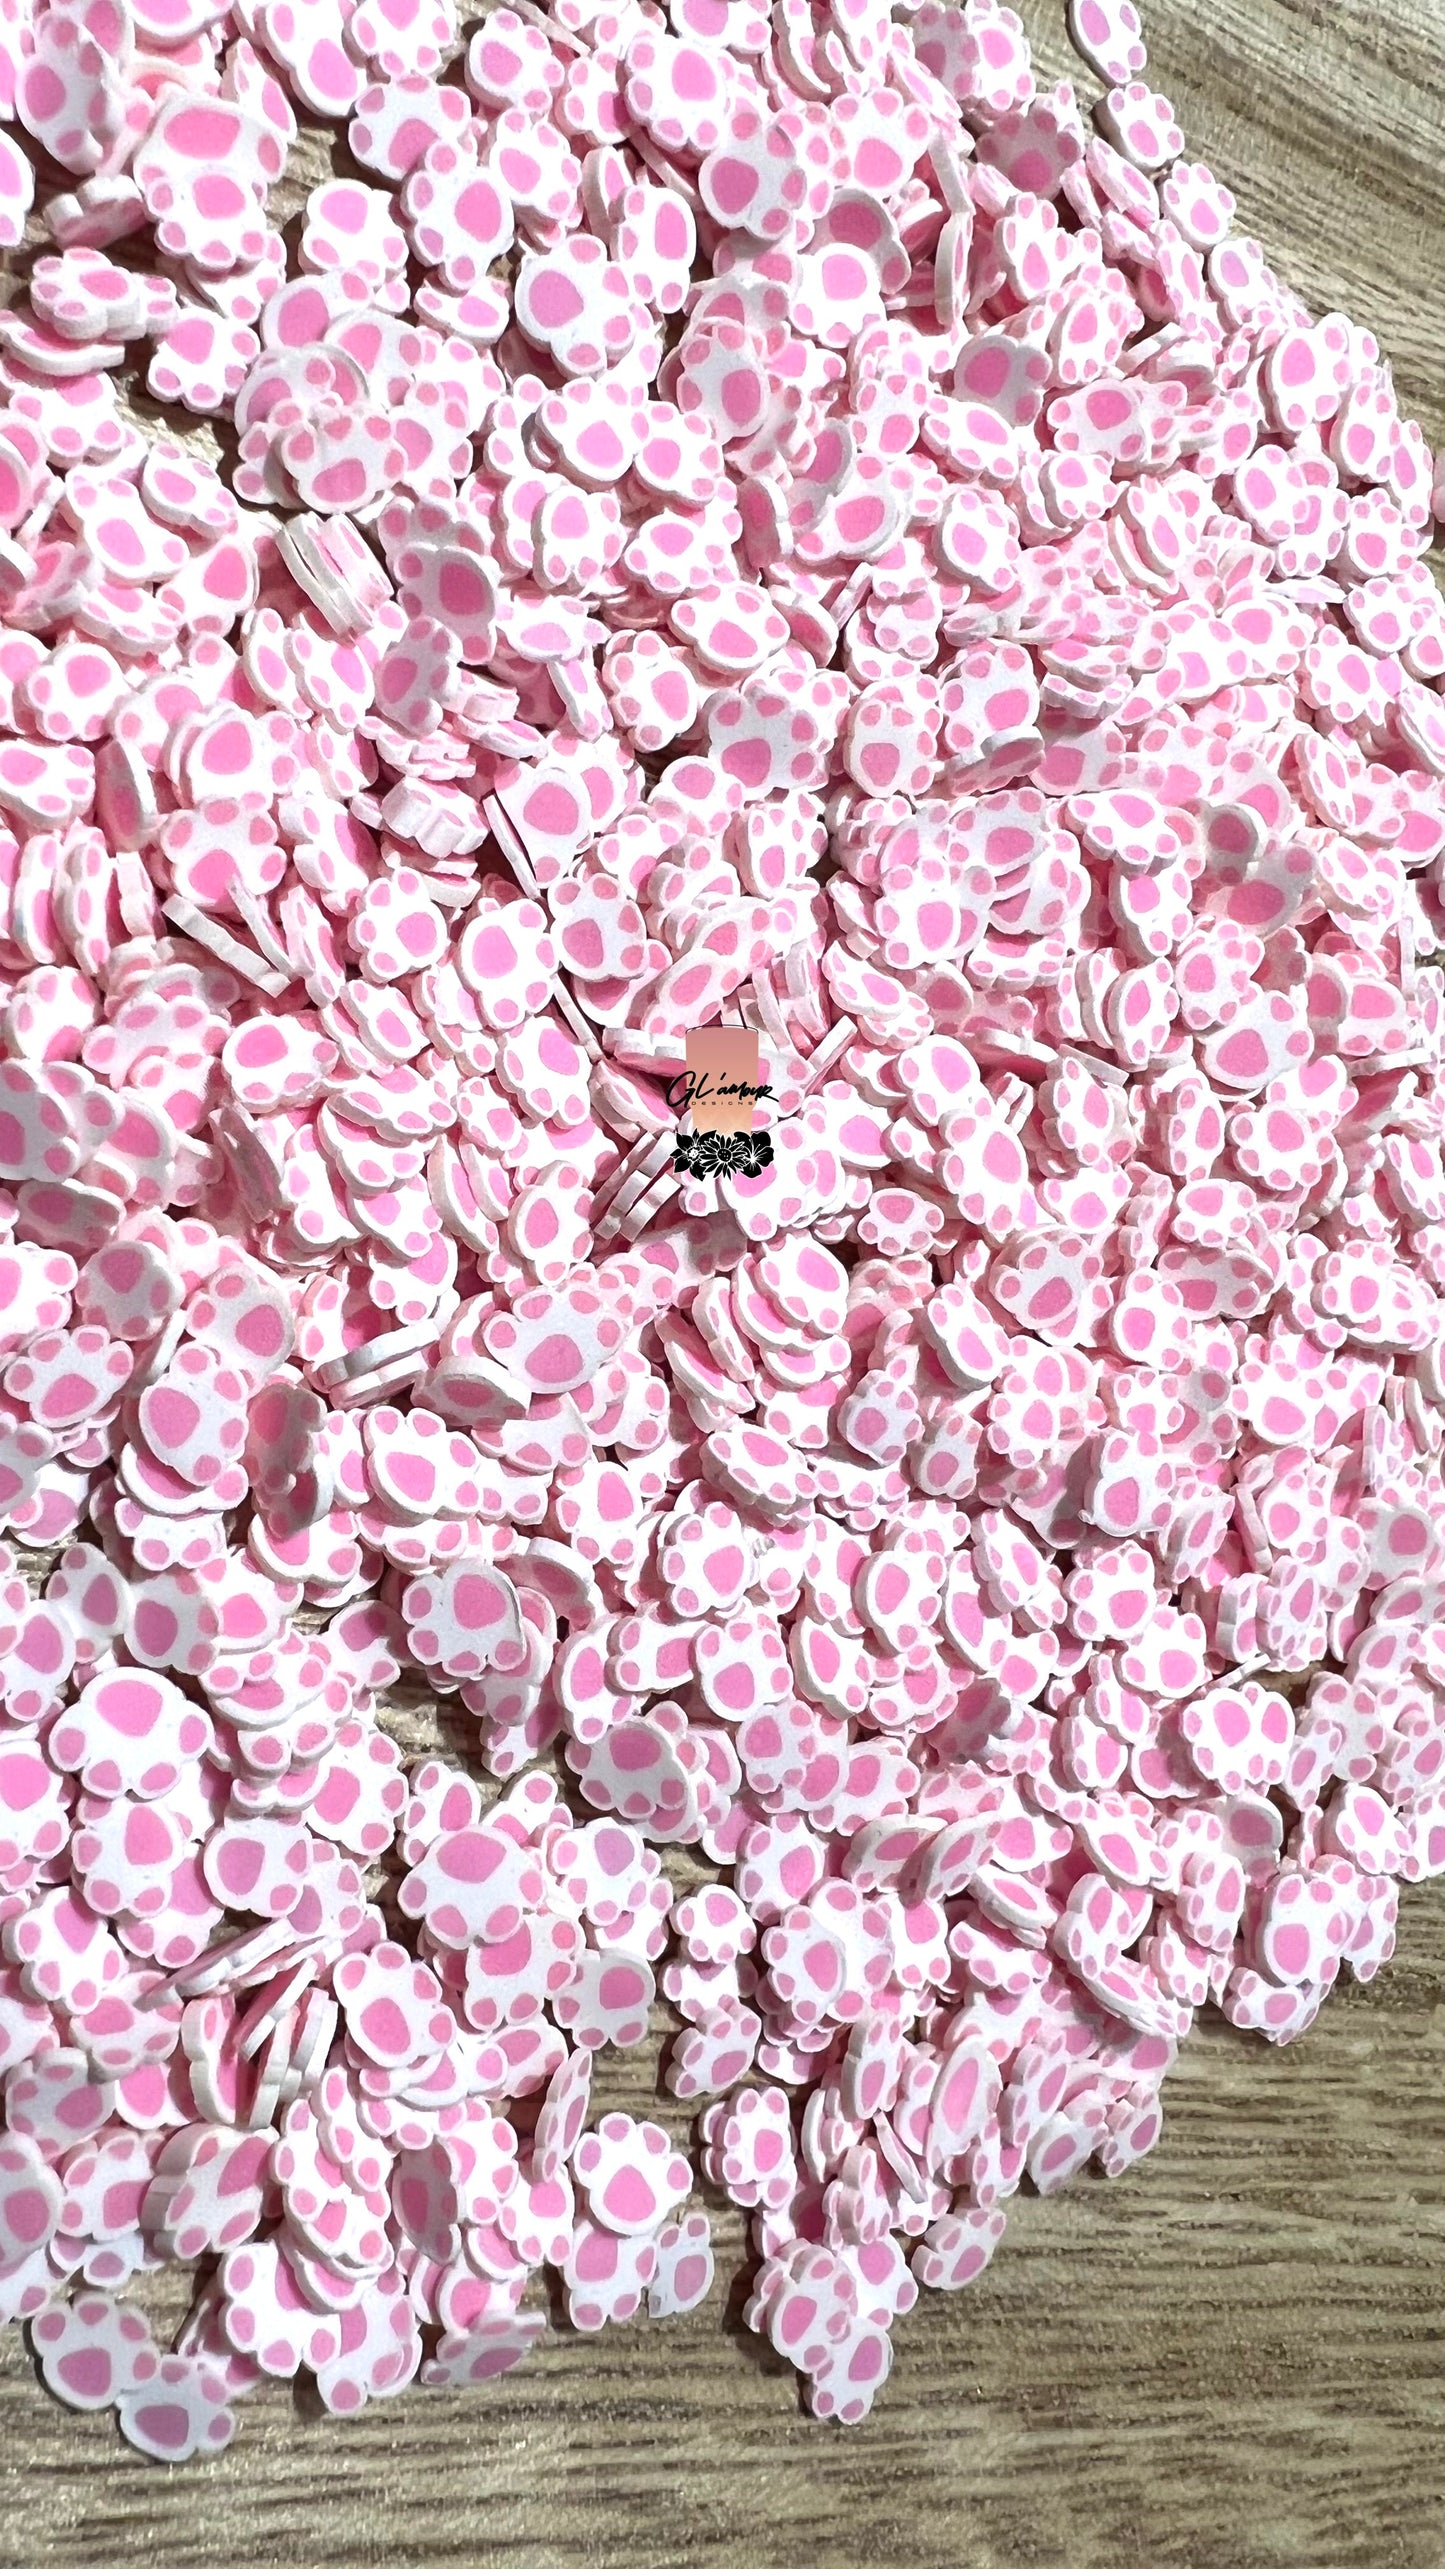 Dog Paw Pink & White Polymer Slices - 5mm Small